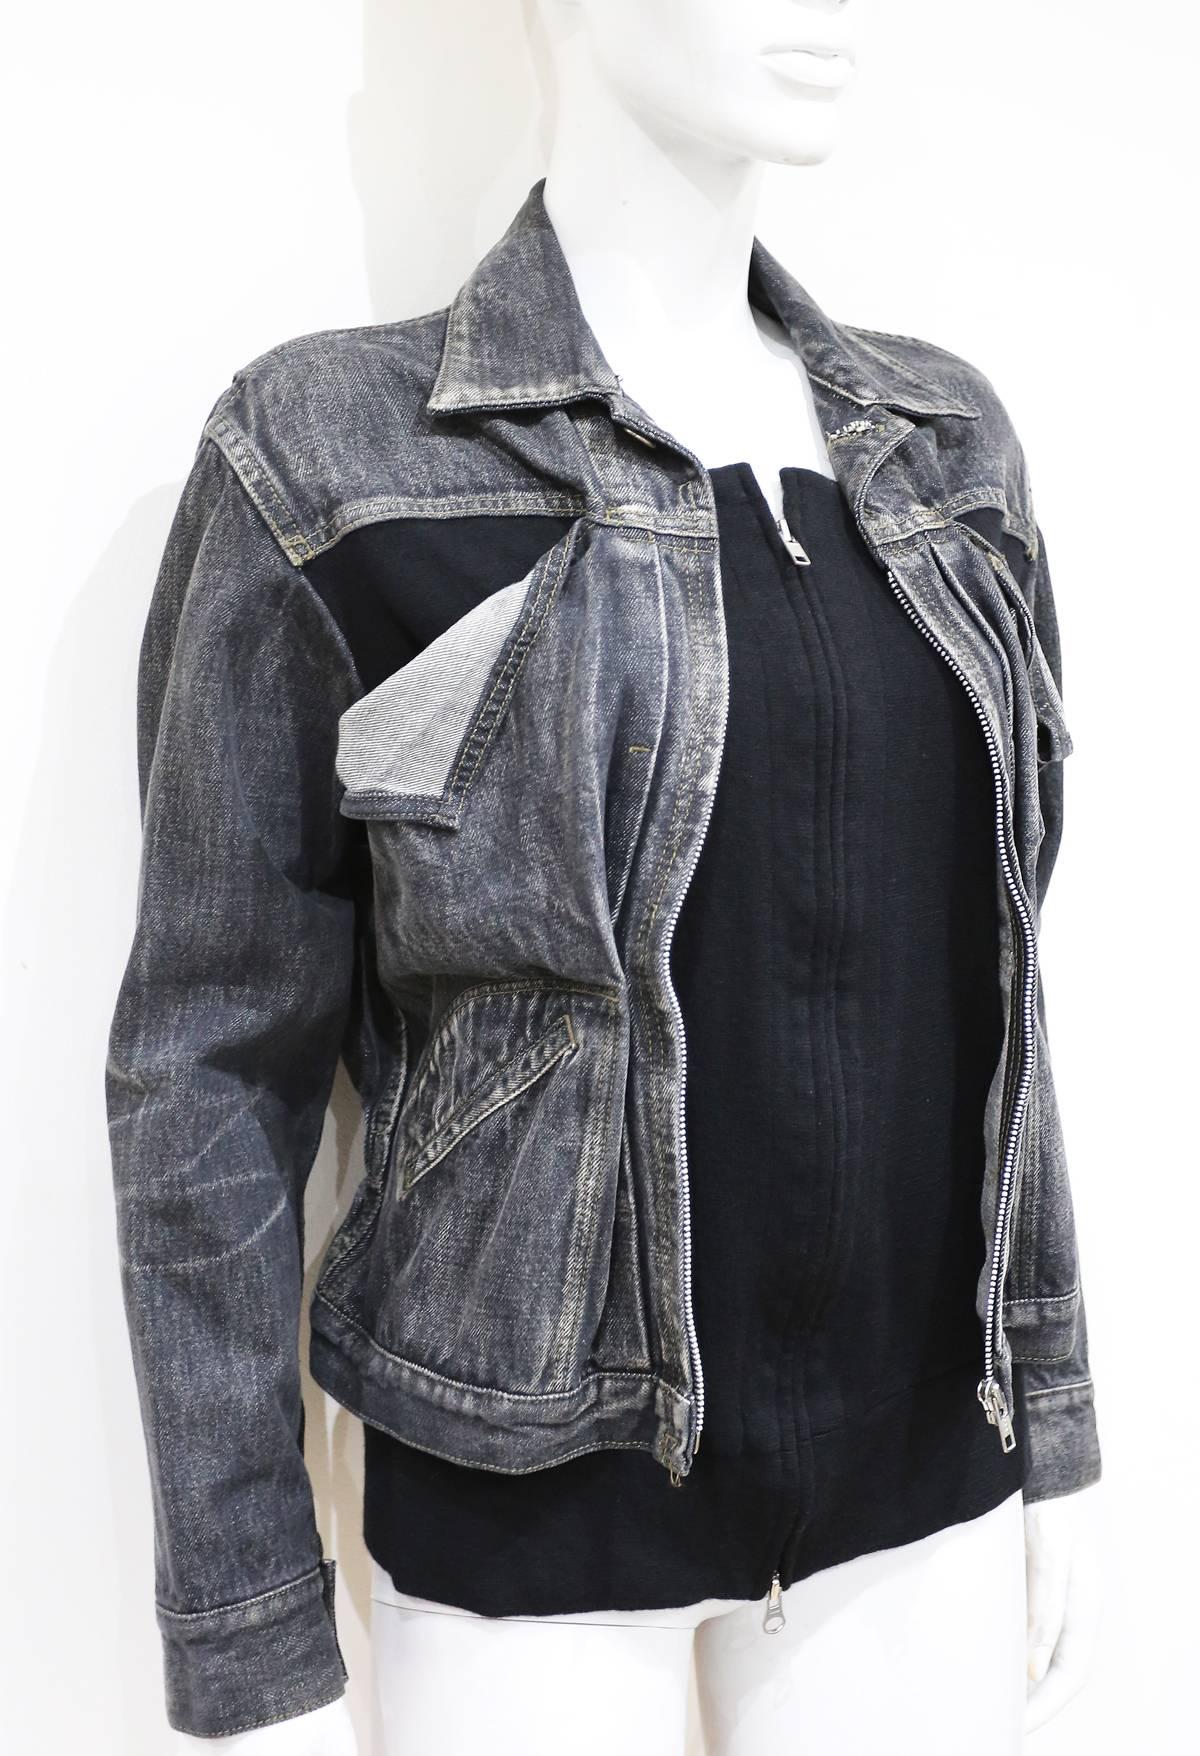 Yohji Yamamoto distressed deconstructed denim jacket, circa 1990s. The jacket features an attached inside black cardigan with a double zipper. 

